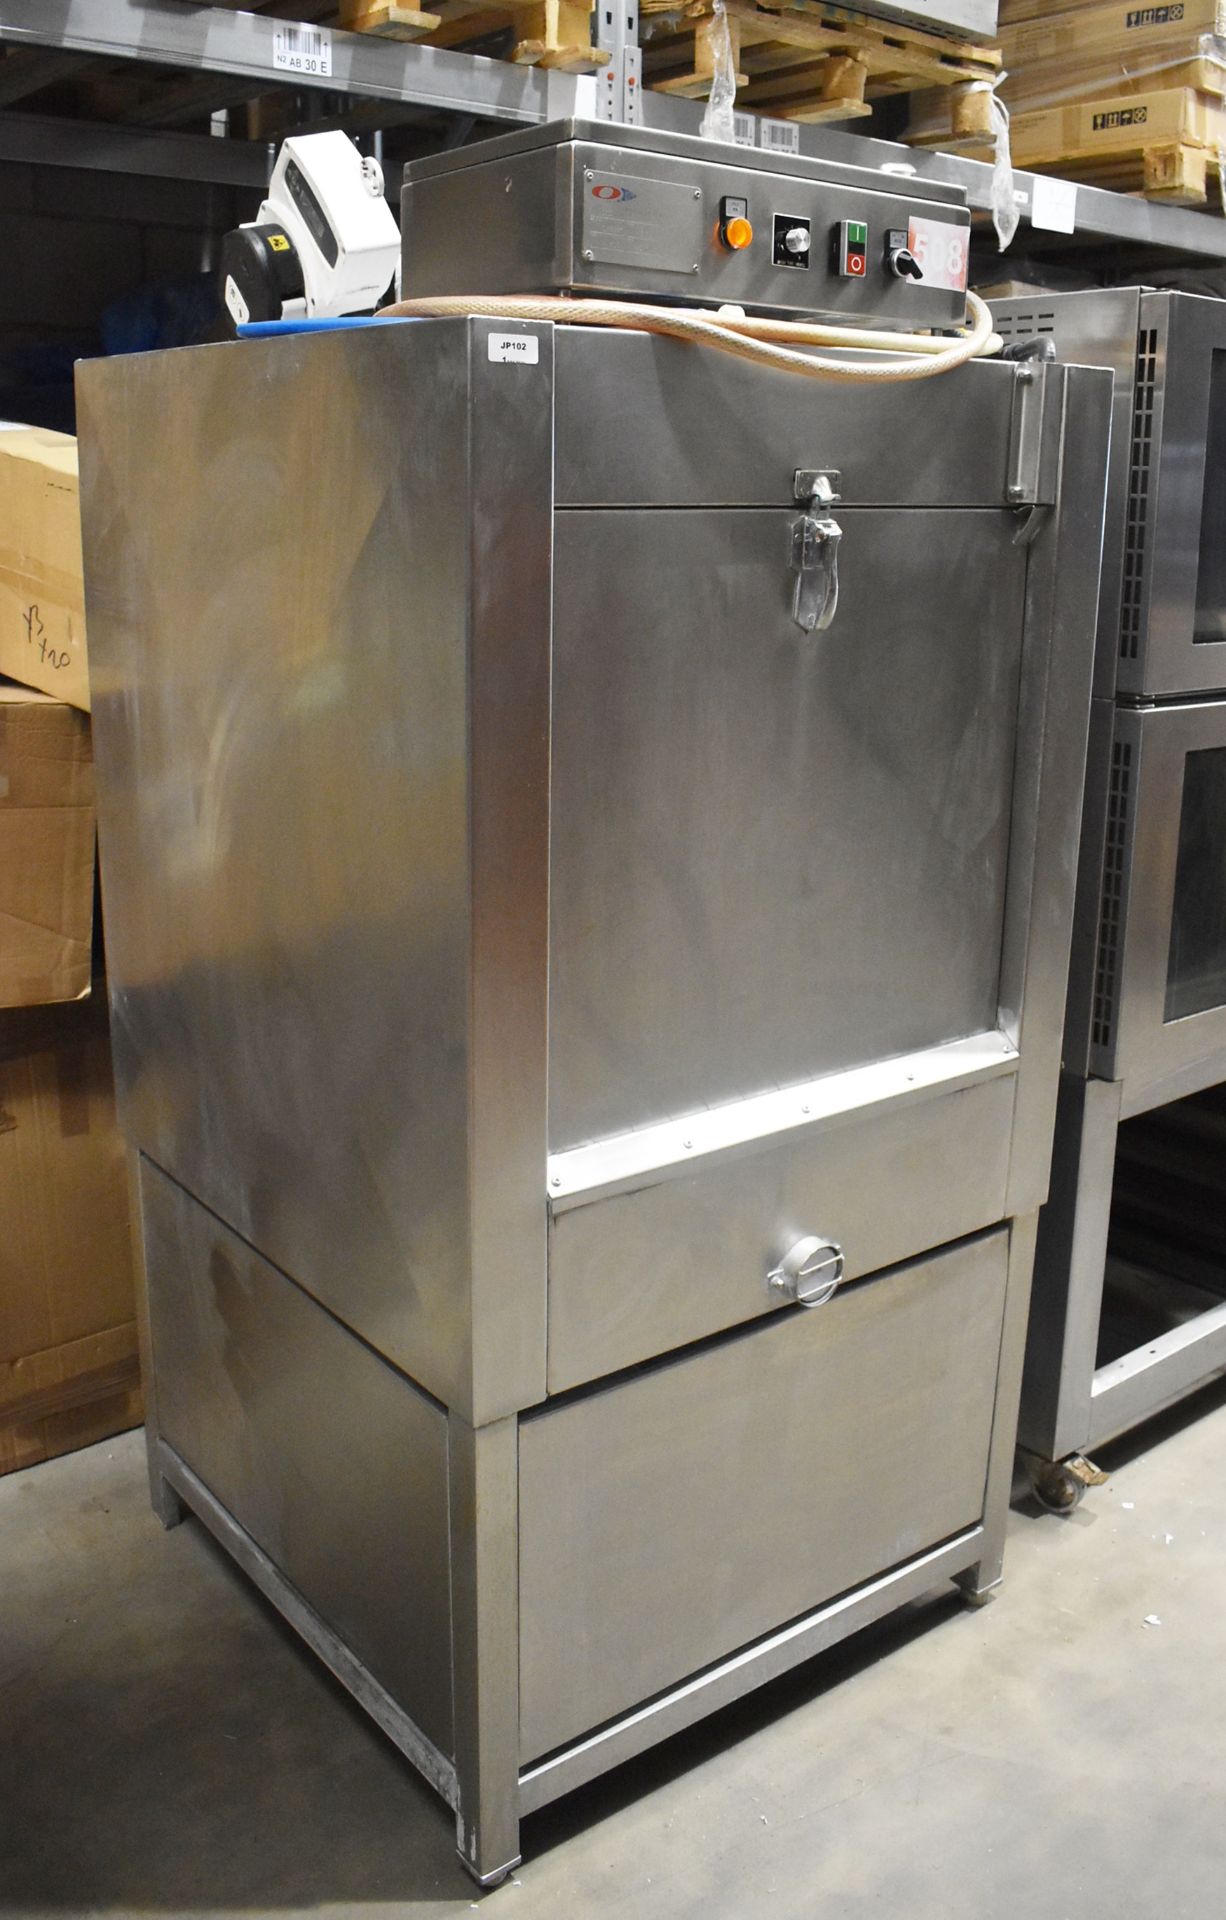 1 x Oliver Douglas Panamatic 500 Industrial Washing Machine For Commercial Kitchen Environments - St - Image 14 of 15